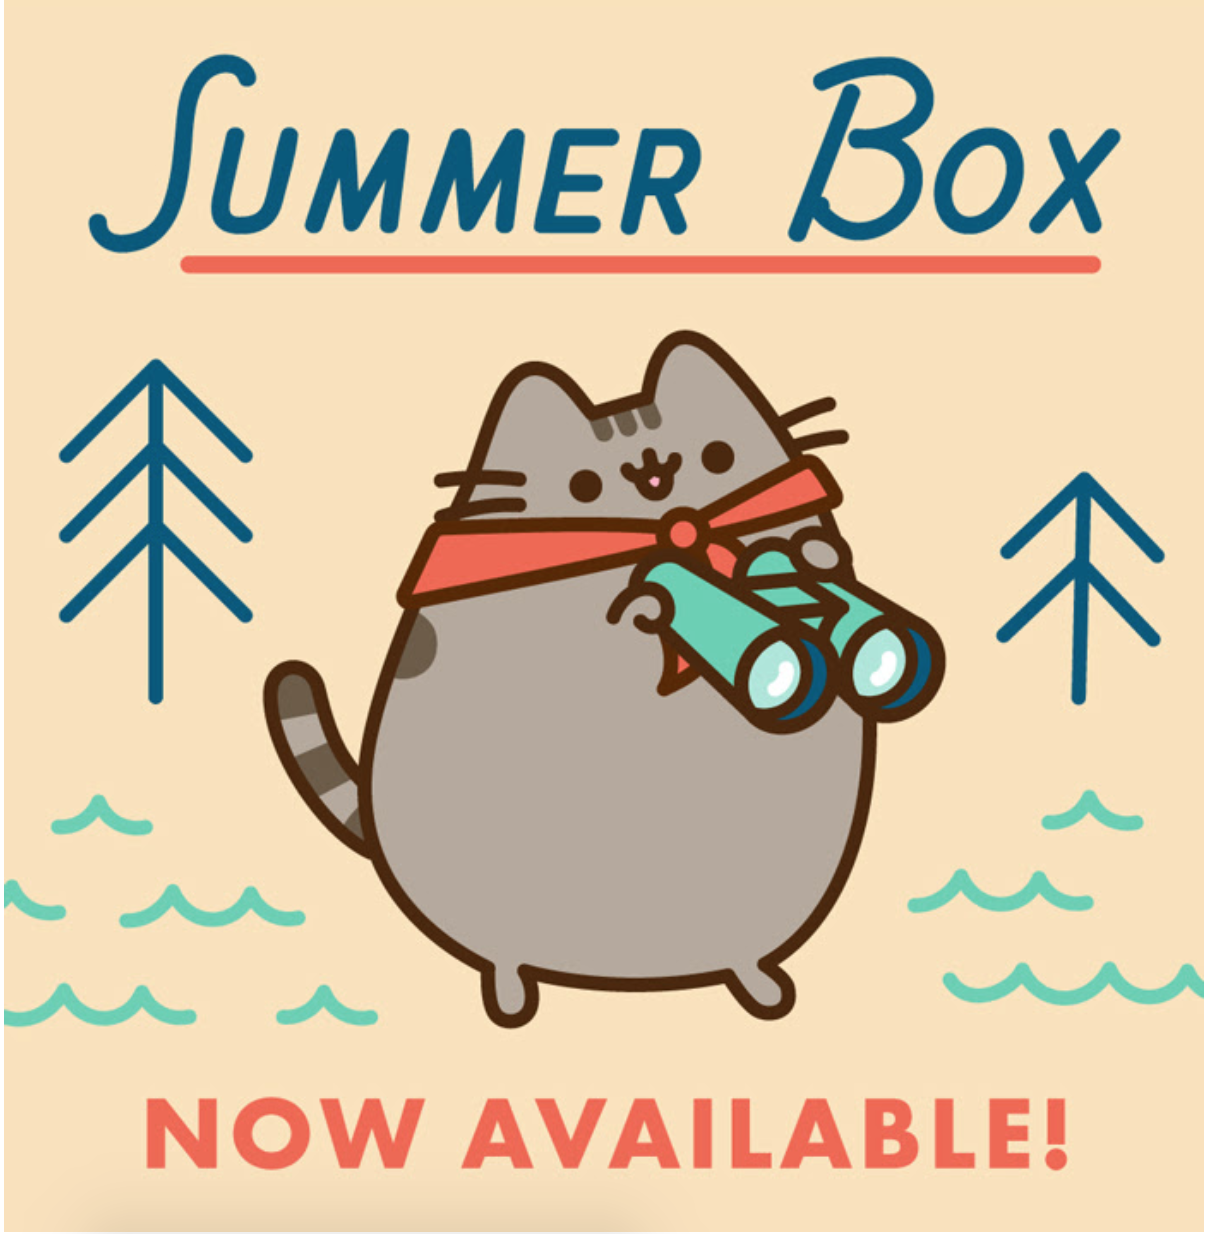 Pusheen Box Subscriptions Are Open! Summer 2020 Box Time!